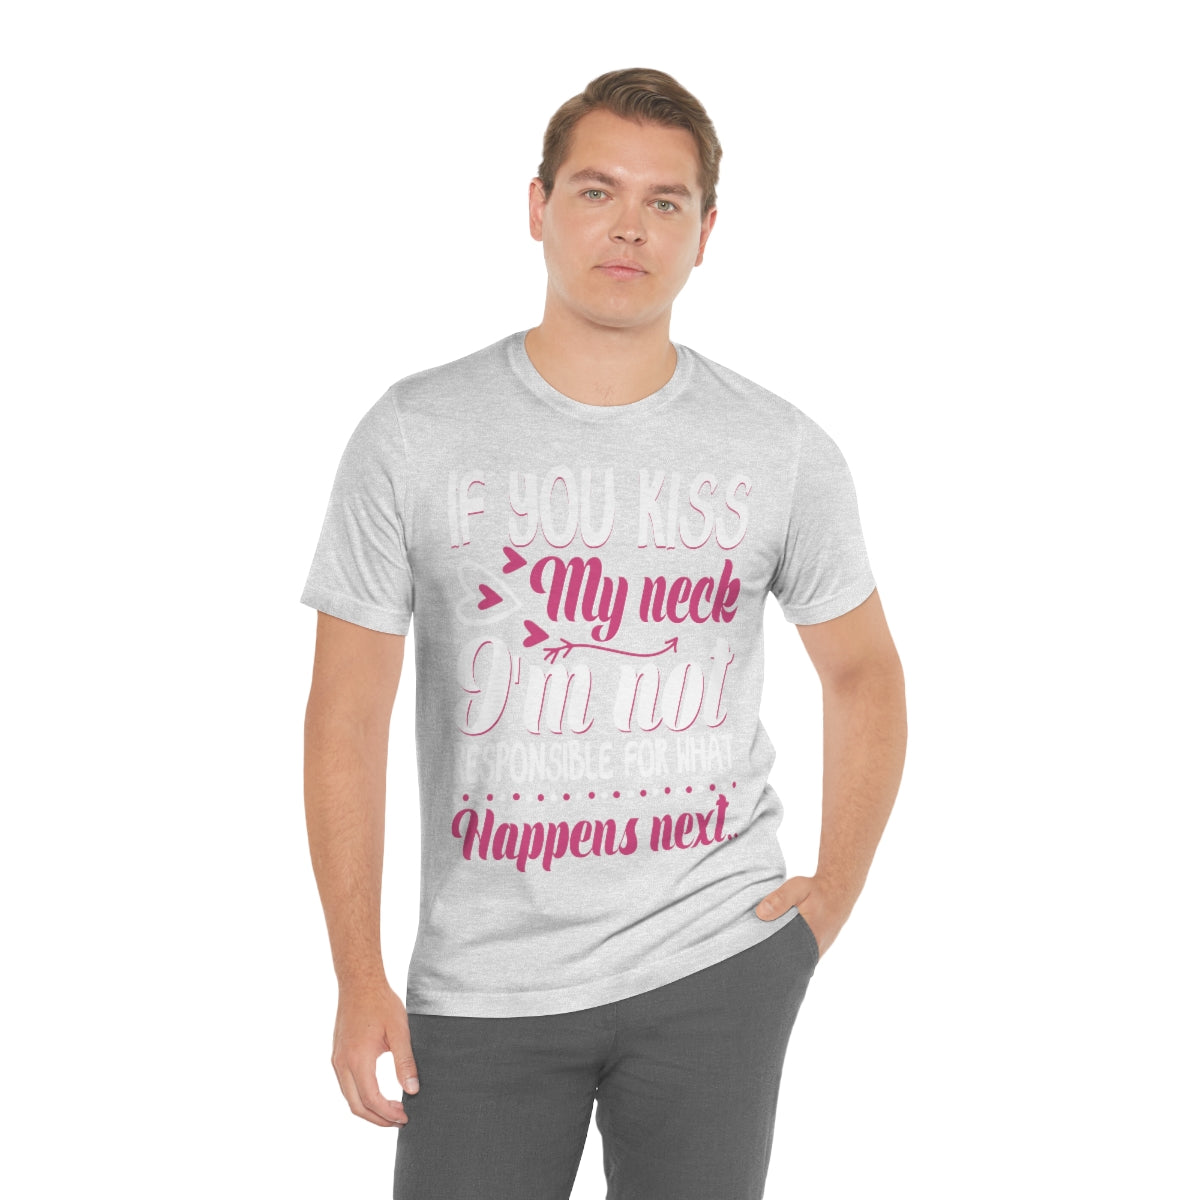 If You Kiss My Neck I'm Not Responsible For What Happens Next - Unisex T-Shirt